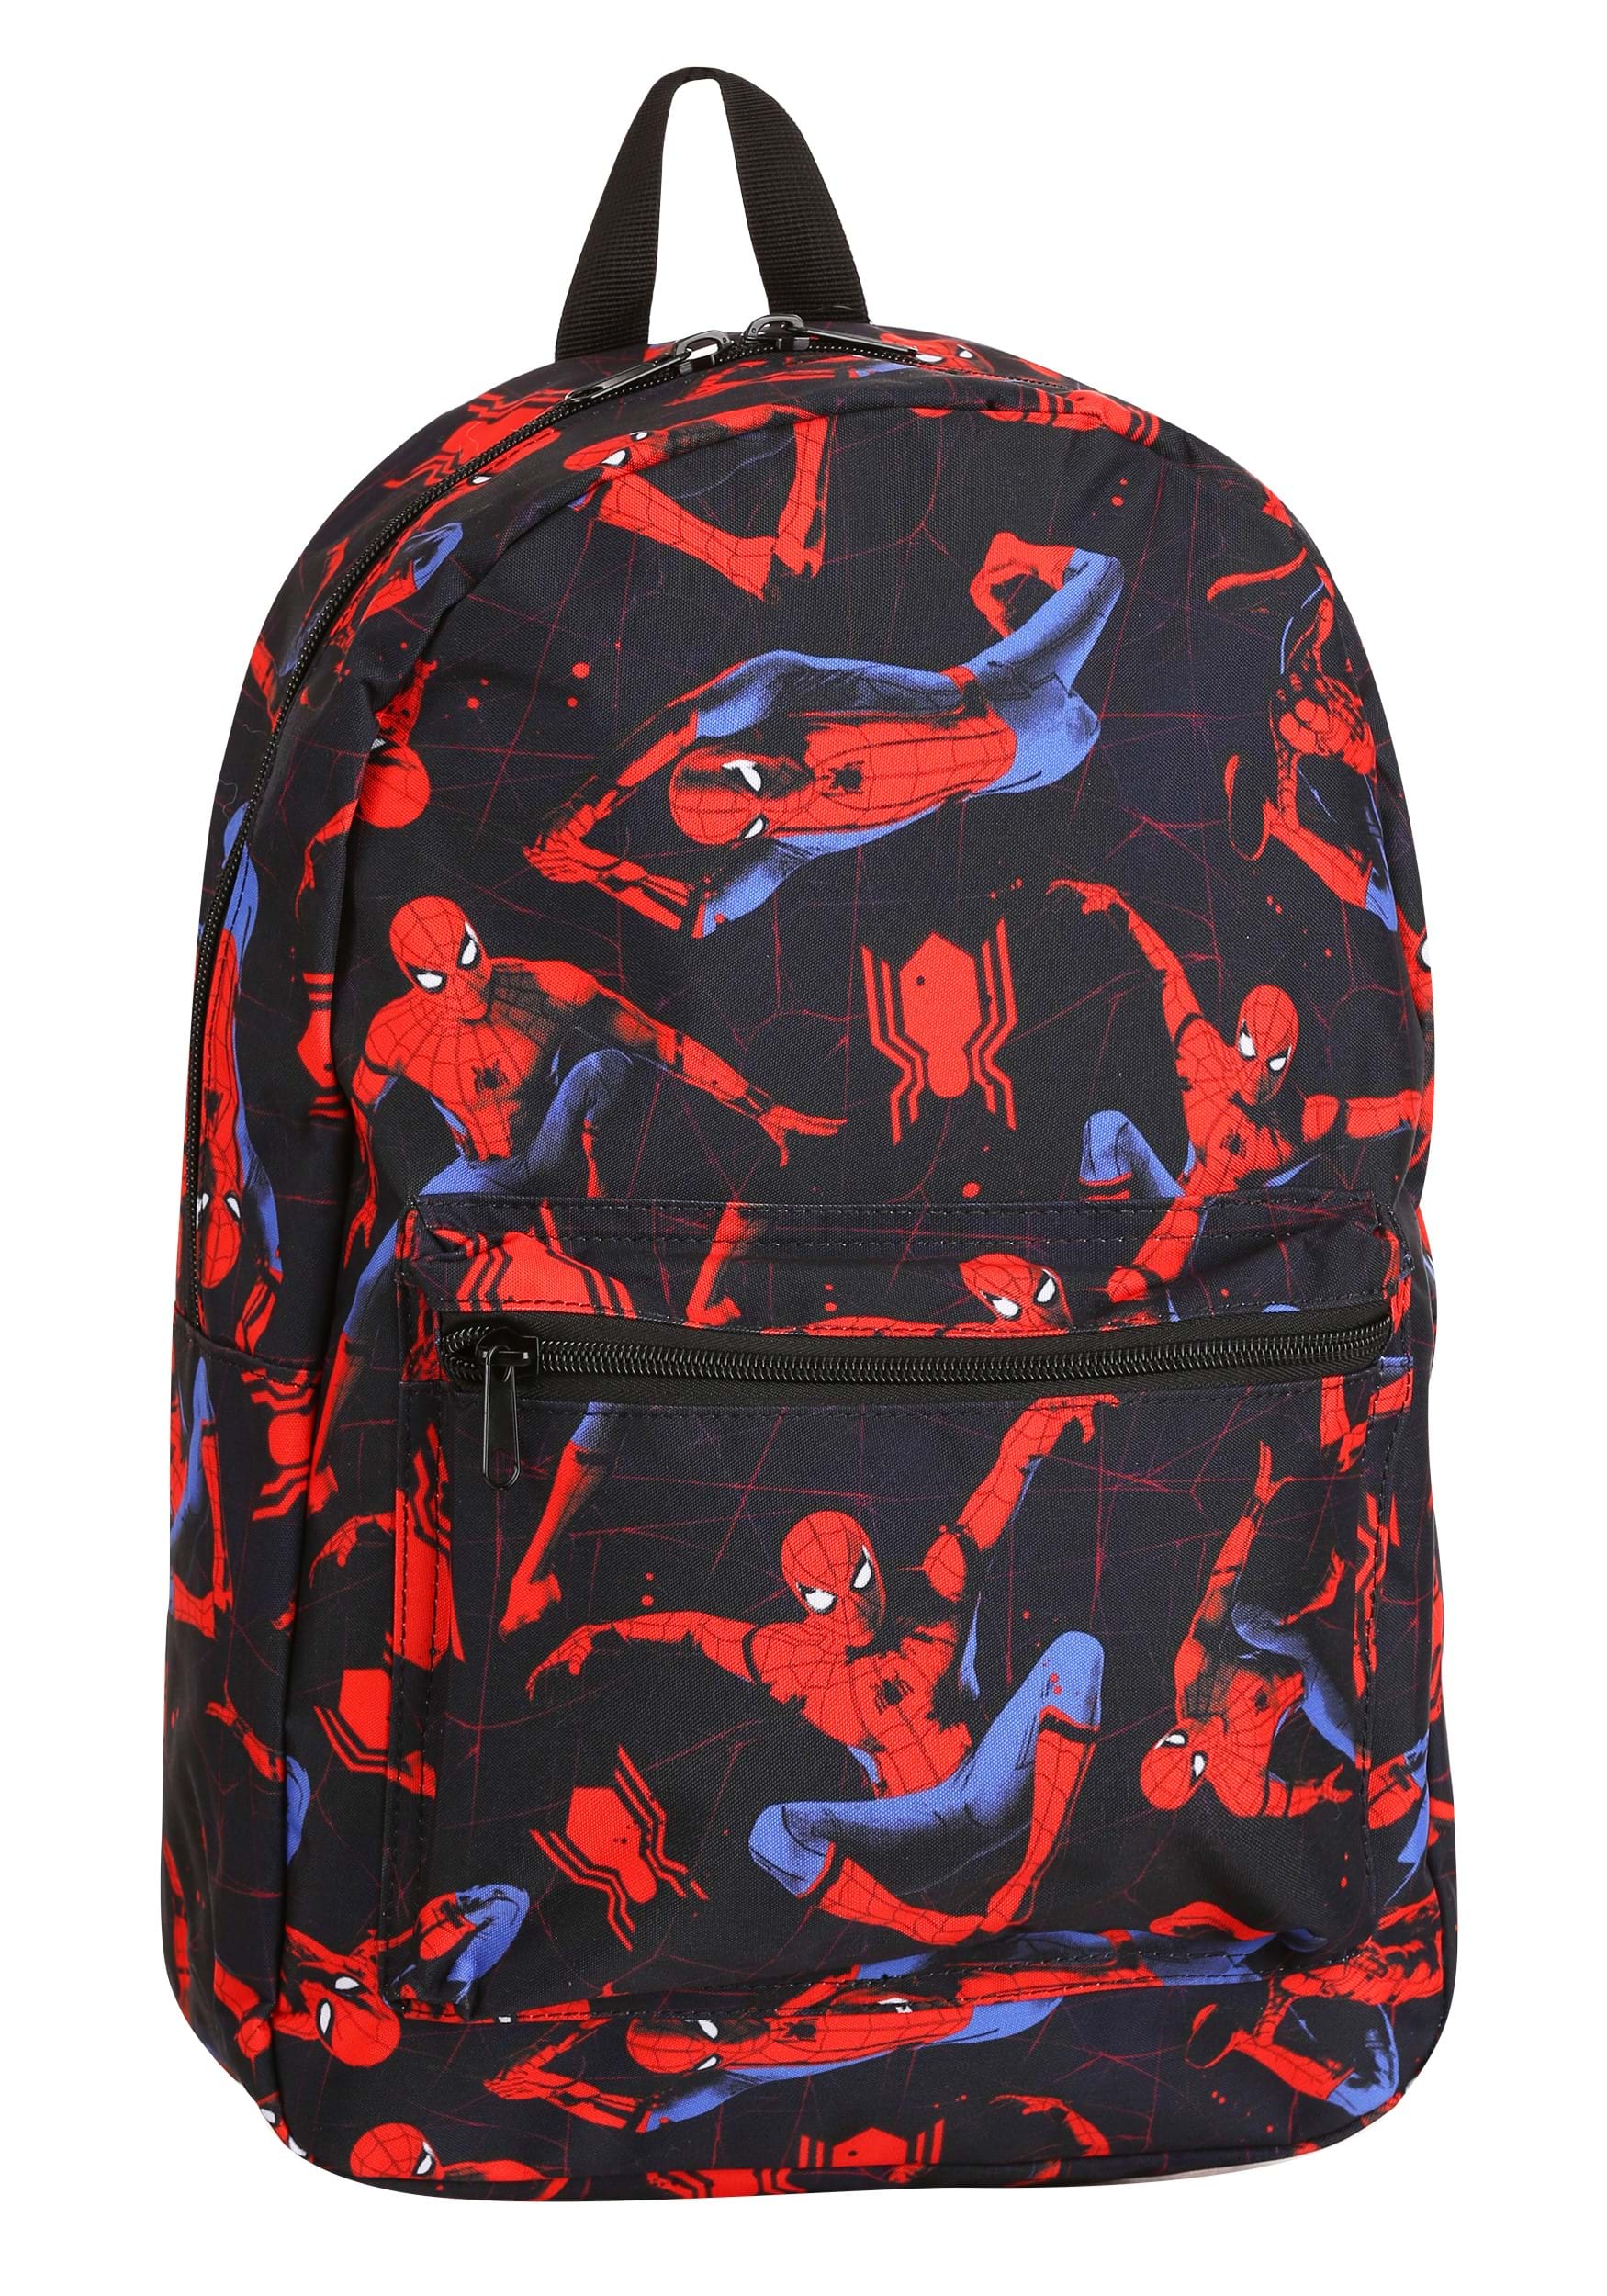 Classic Spider Man Print Backpack